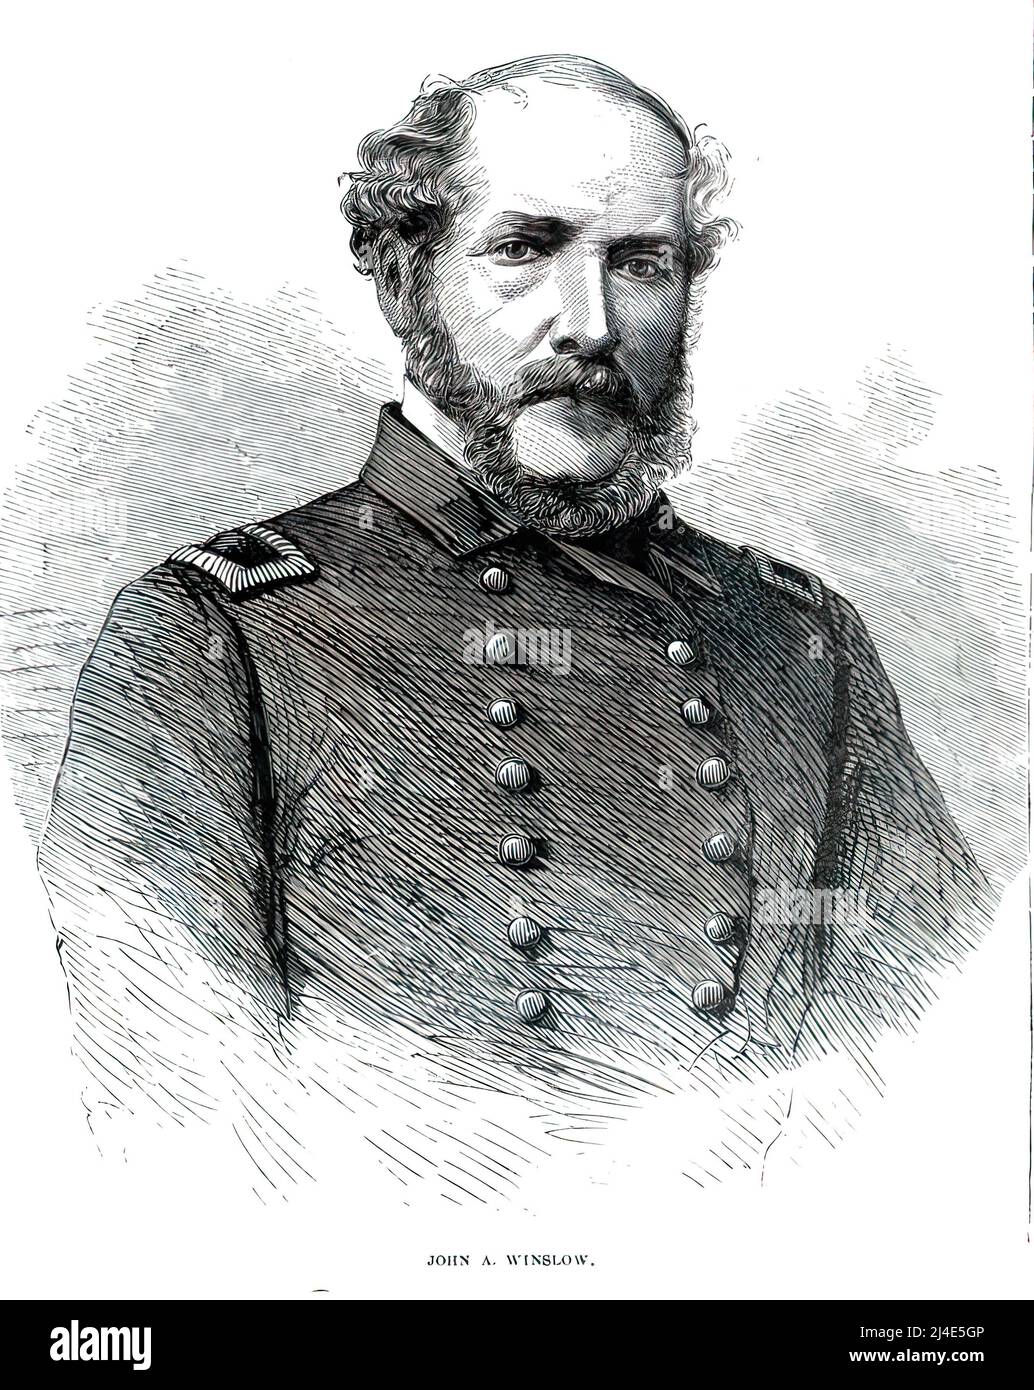 John Ancrum Winslow, rear admiral in the Union Navy in the American Civil War. 19th century illustration. Stock Photo